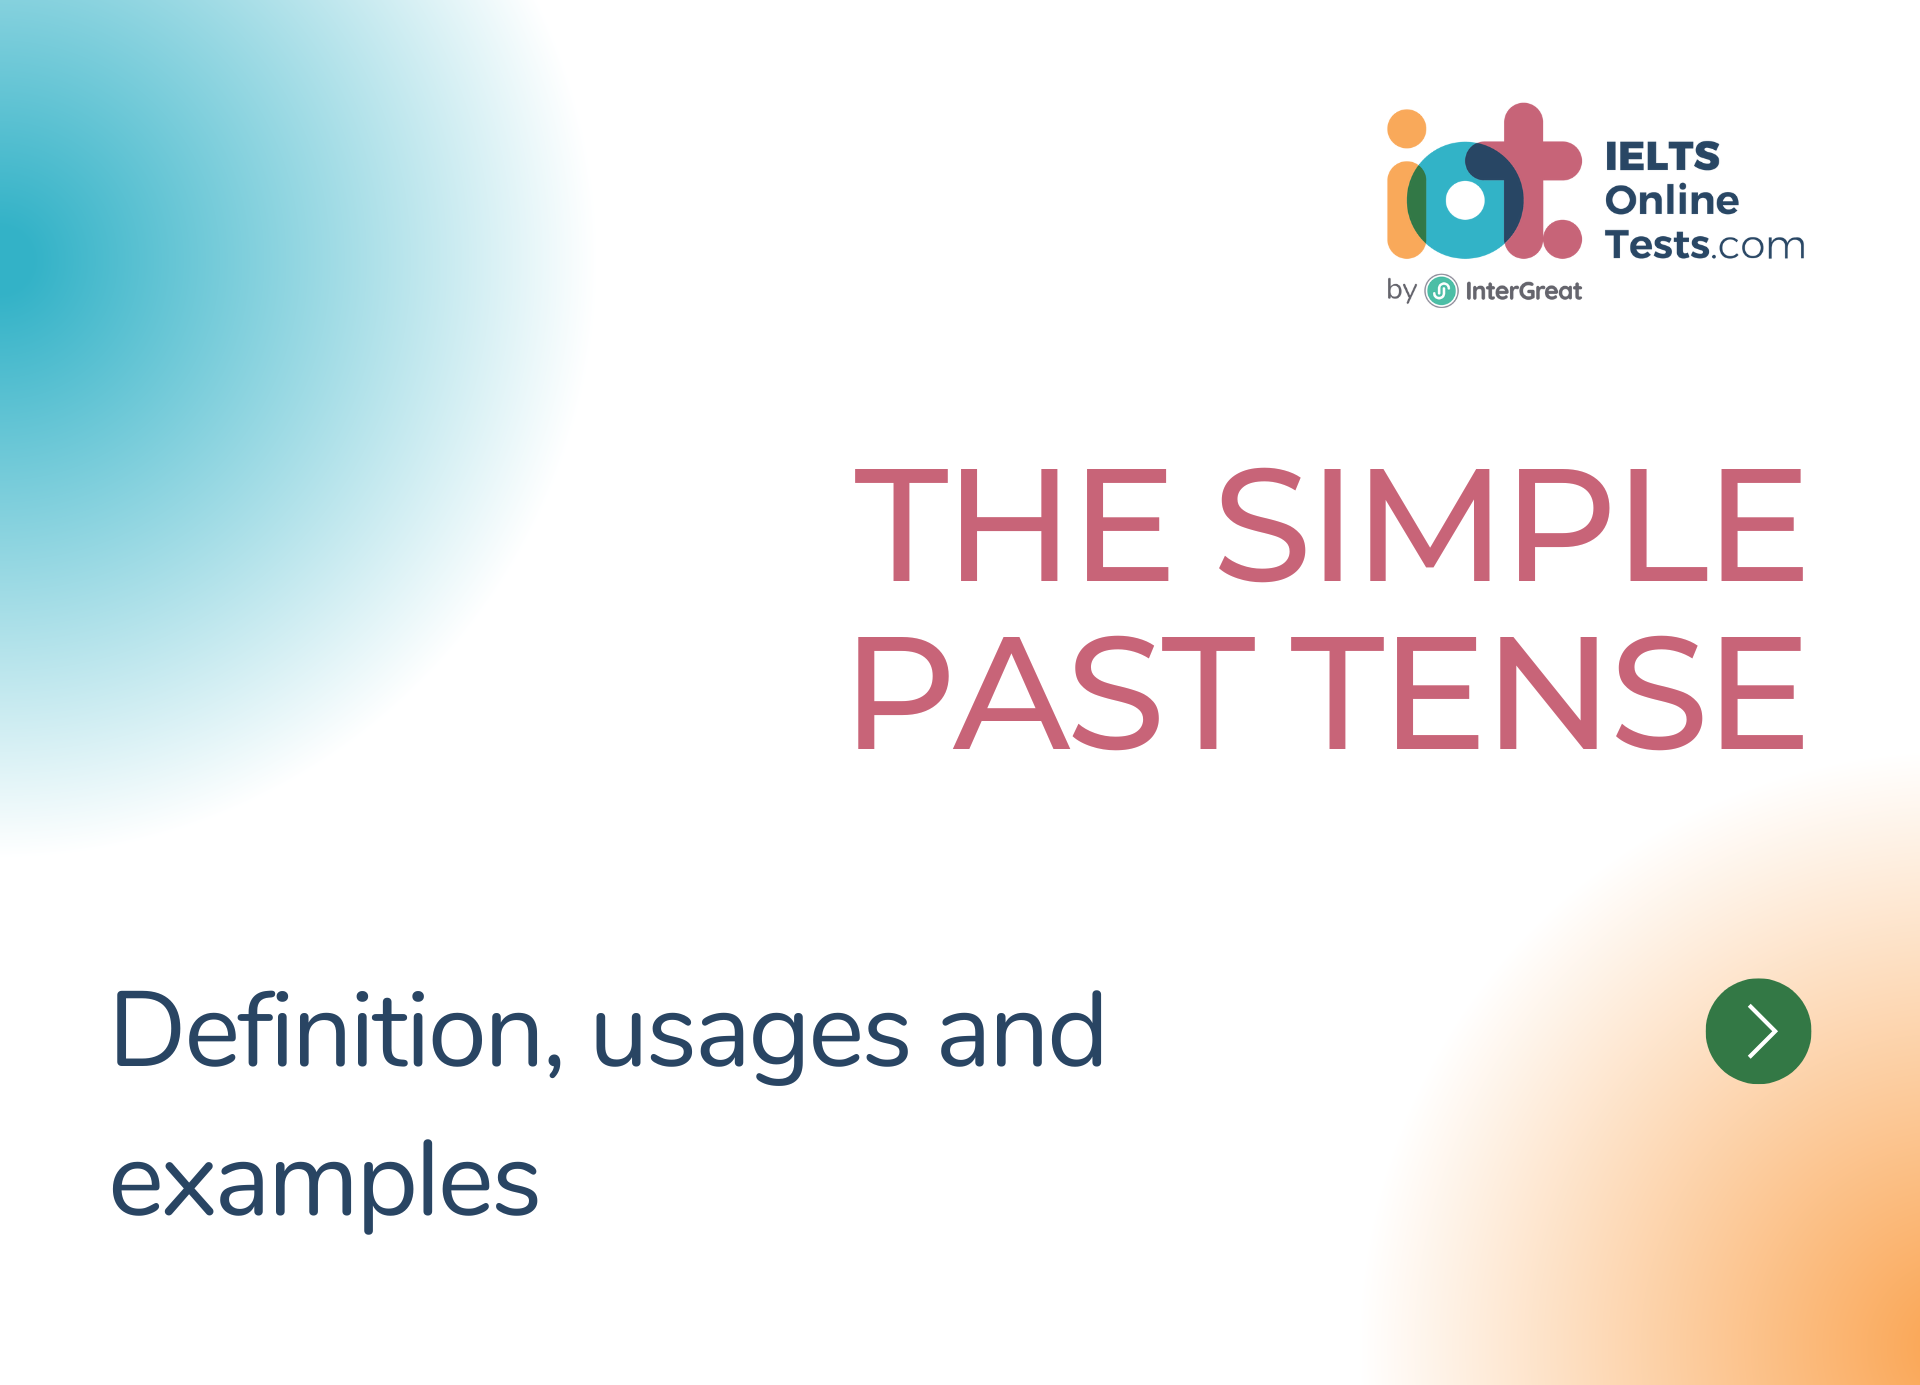 The simple past tense